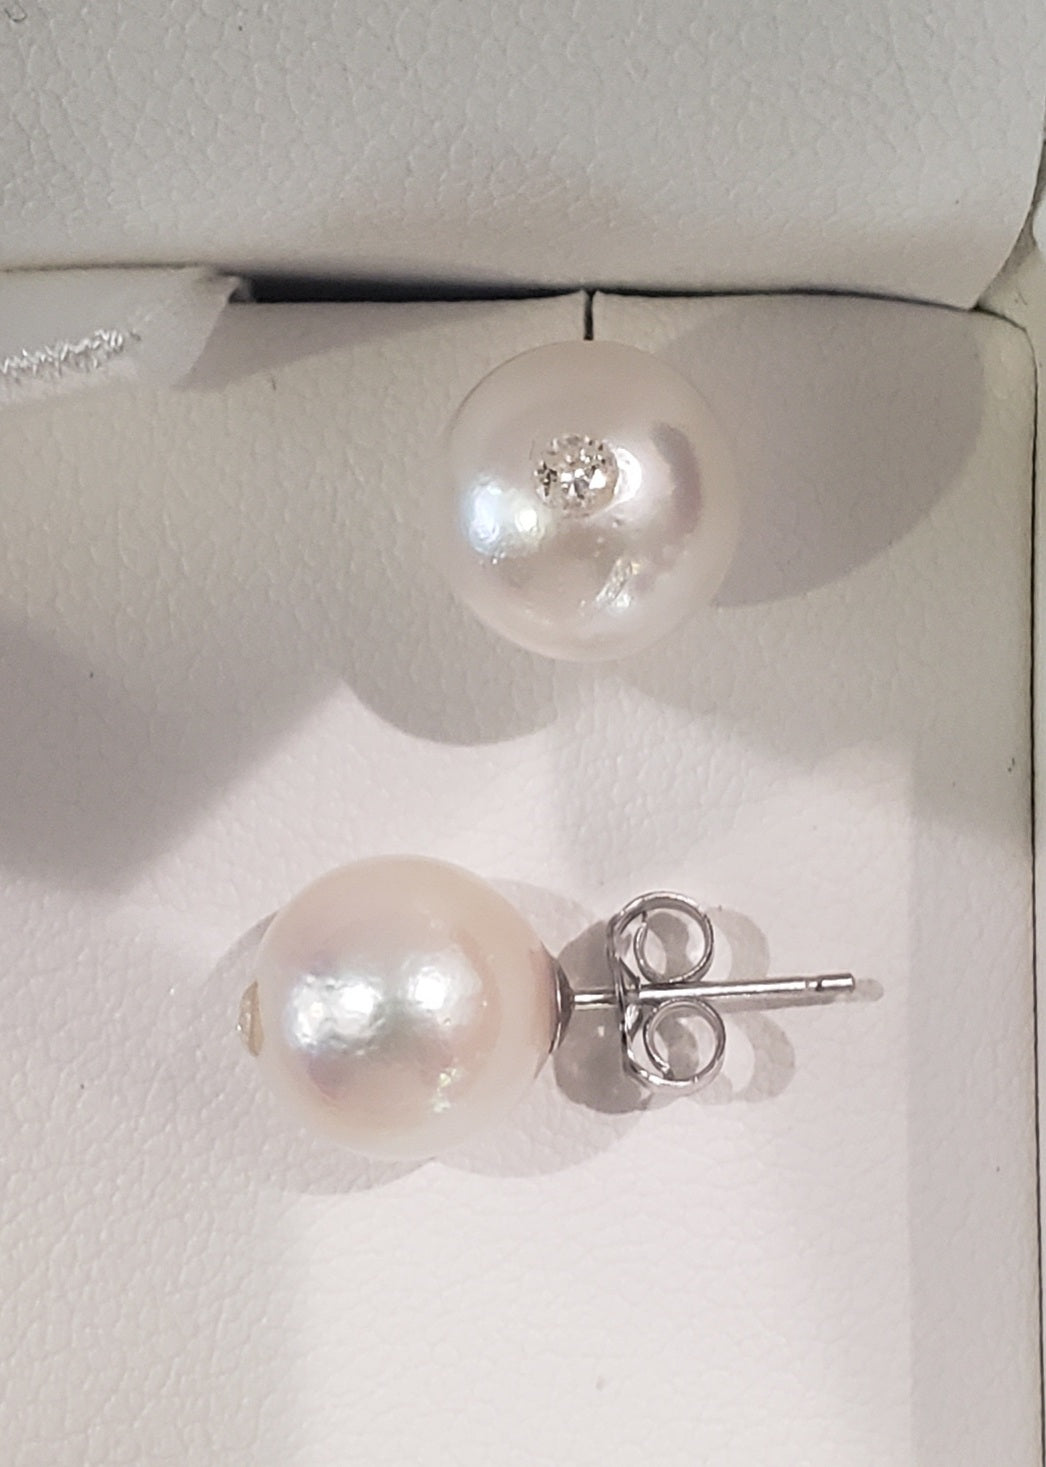 14K White Gold 6.5-7.0mm Cultured Pearl and 0.025cttw Diamond Earrings with Butterfly Backs